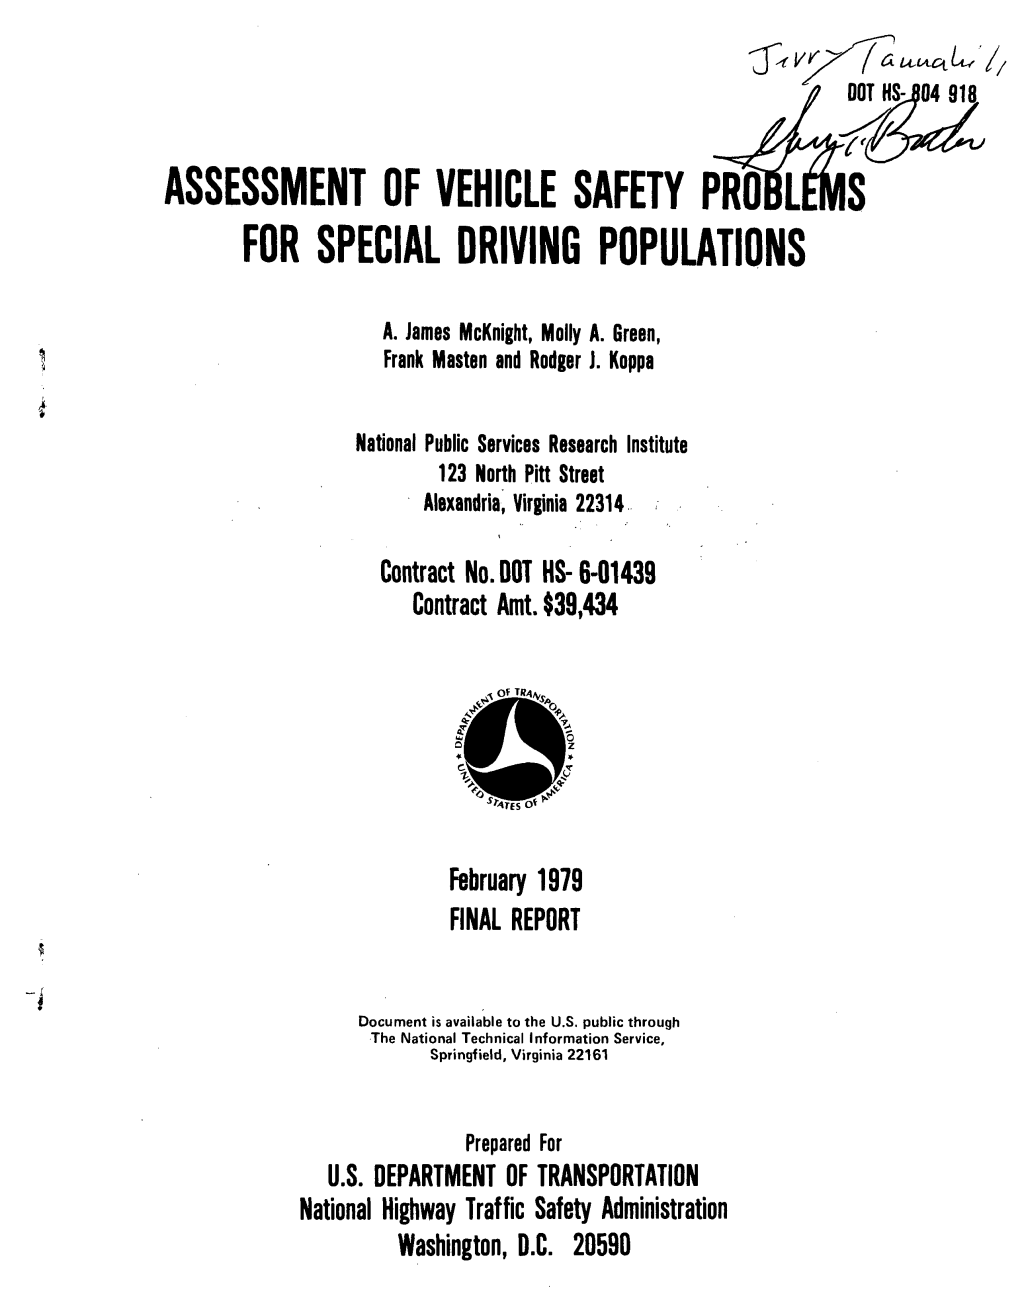 ASSESSMENT of VEHICLE SAFETY PRO for SPECIAL DRIVING POPULATIONS